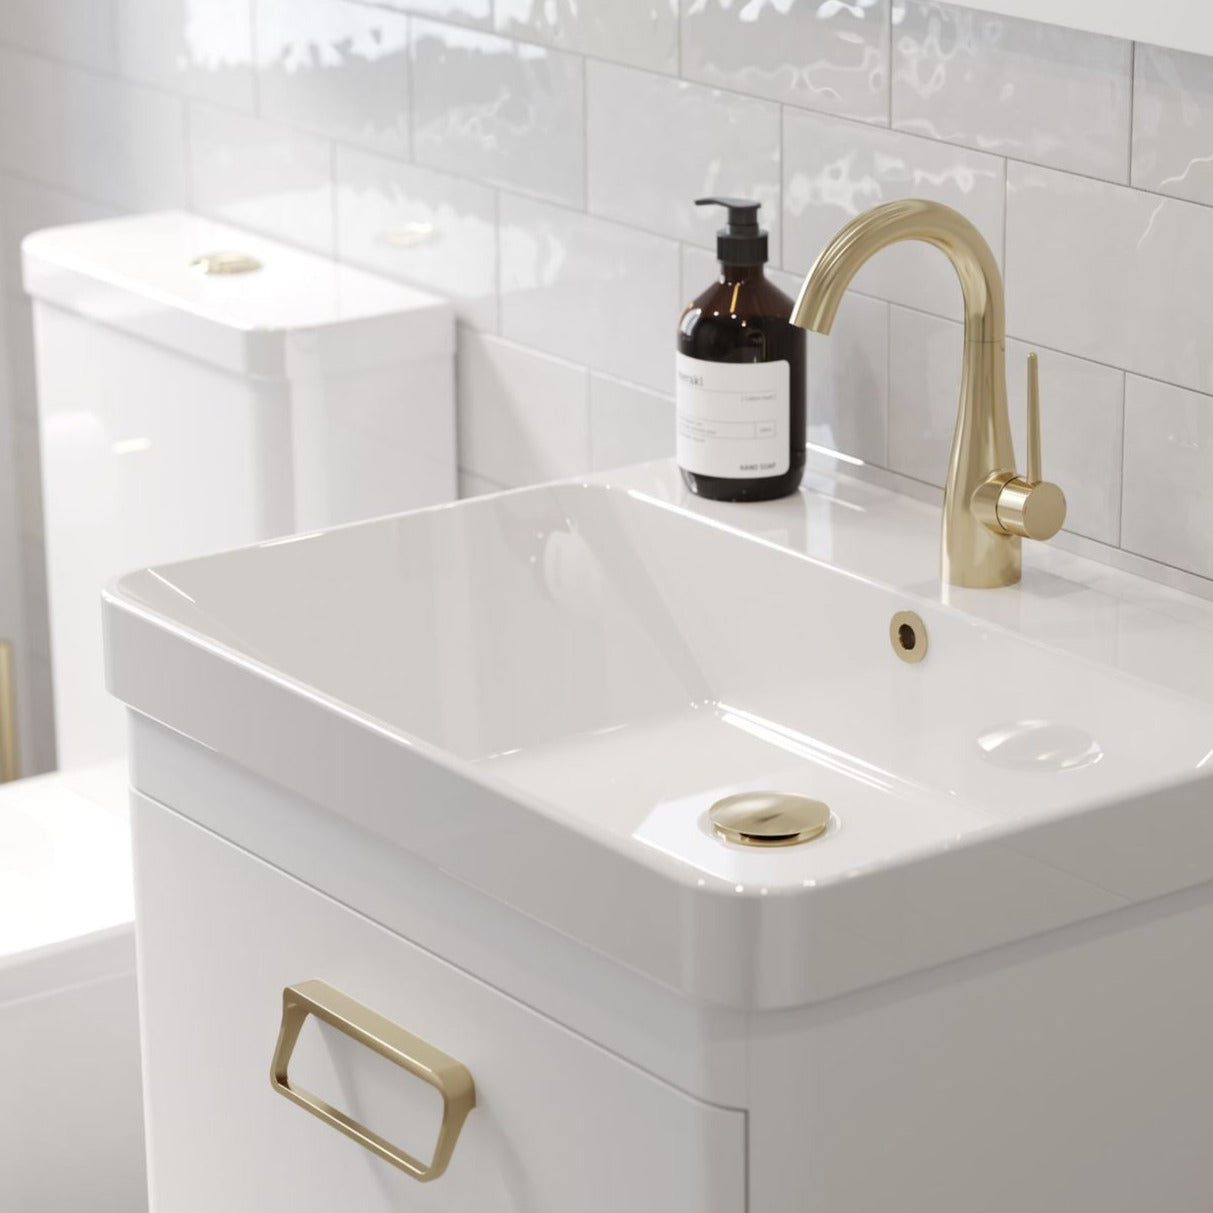 Brushed brass basin mixer tap with swivel spout, Eden